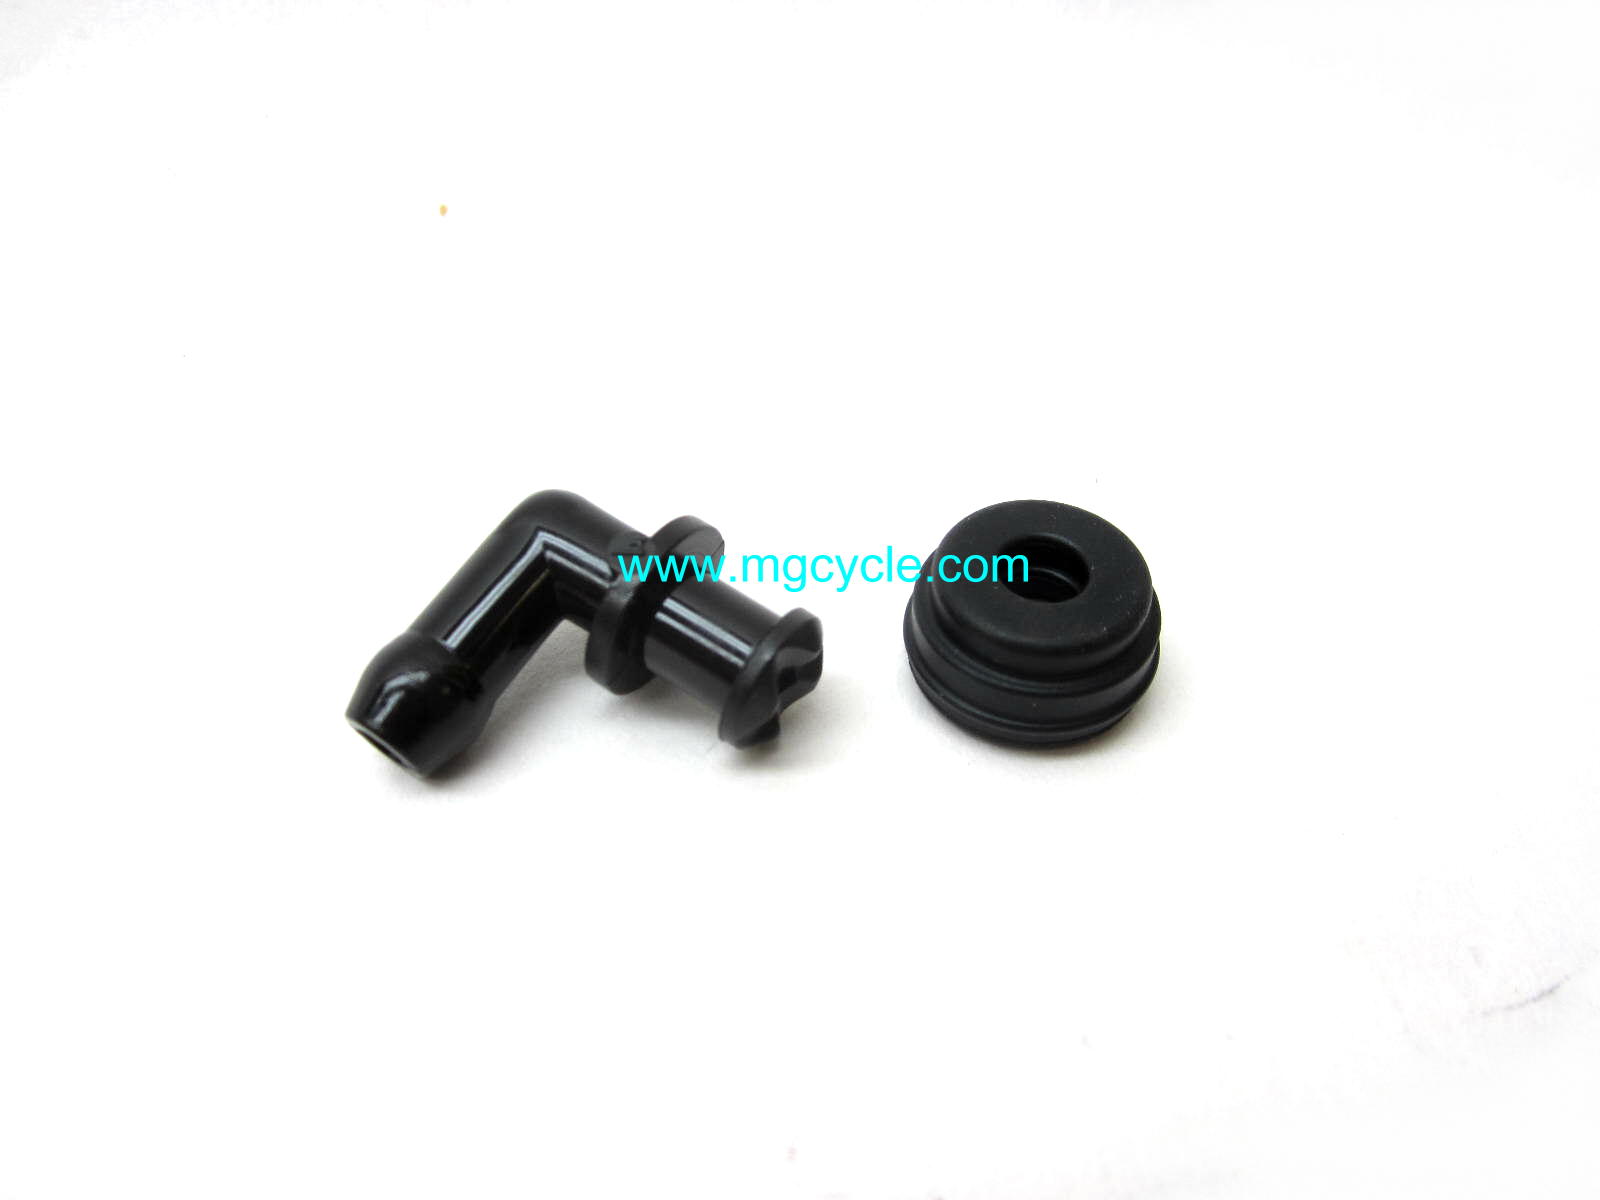 Brake fluid elbow and seal for remote reservoir master cylinders